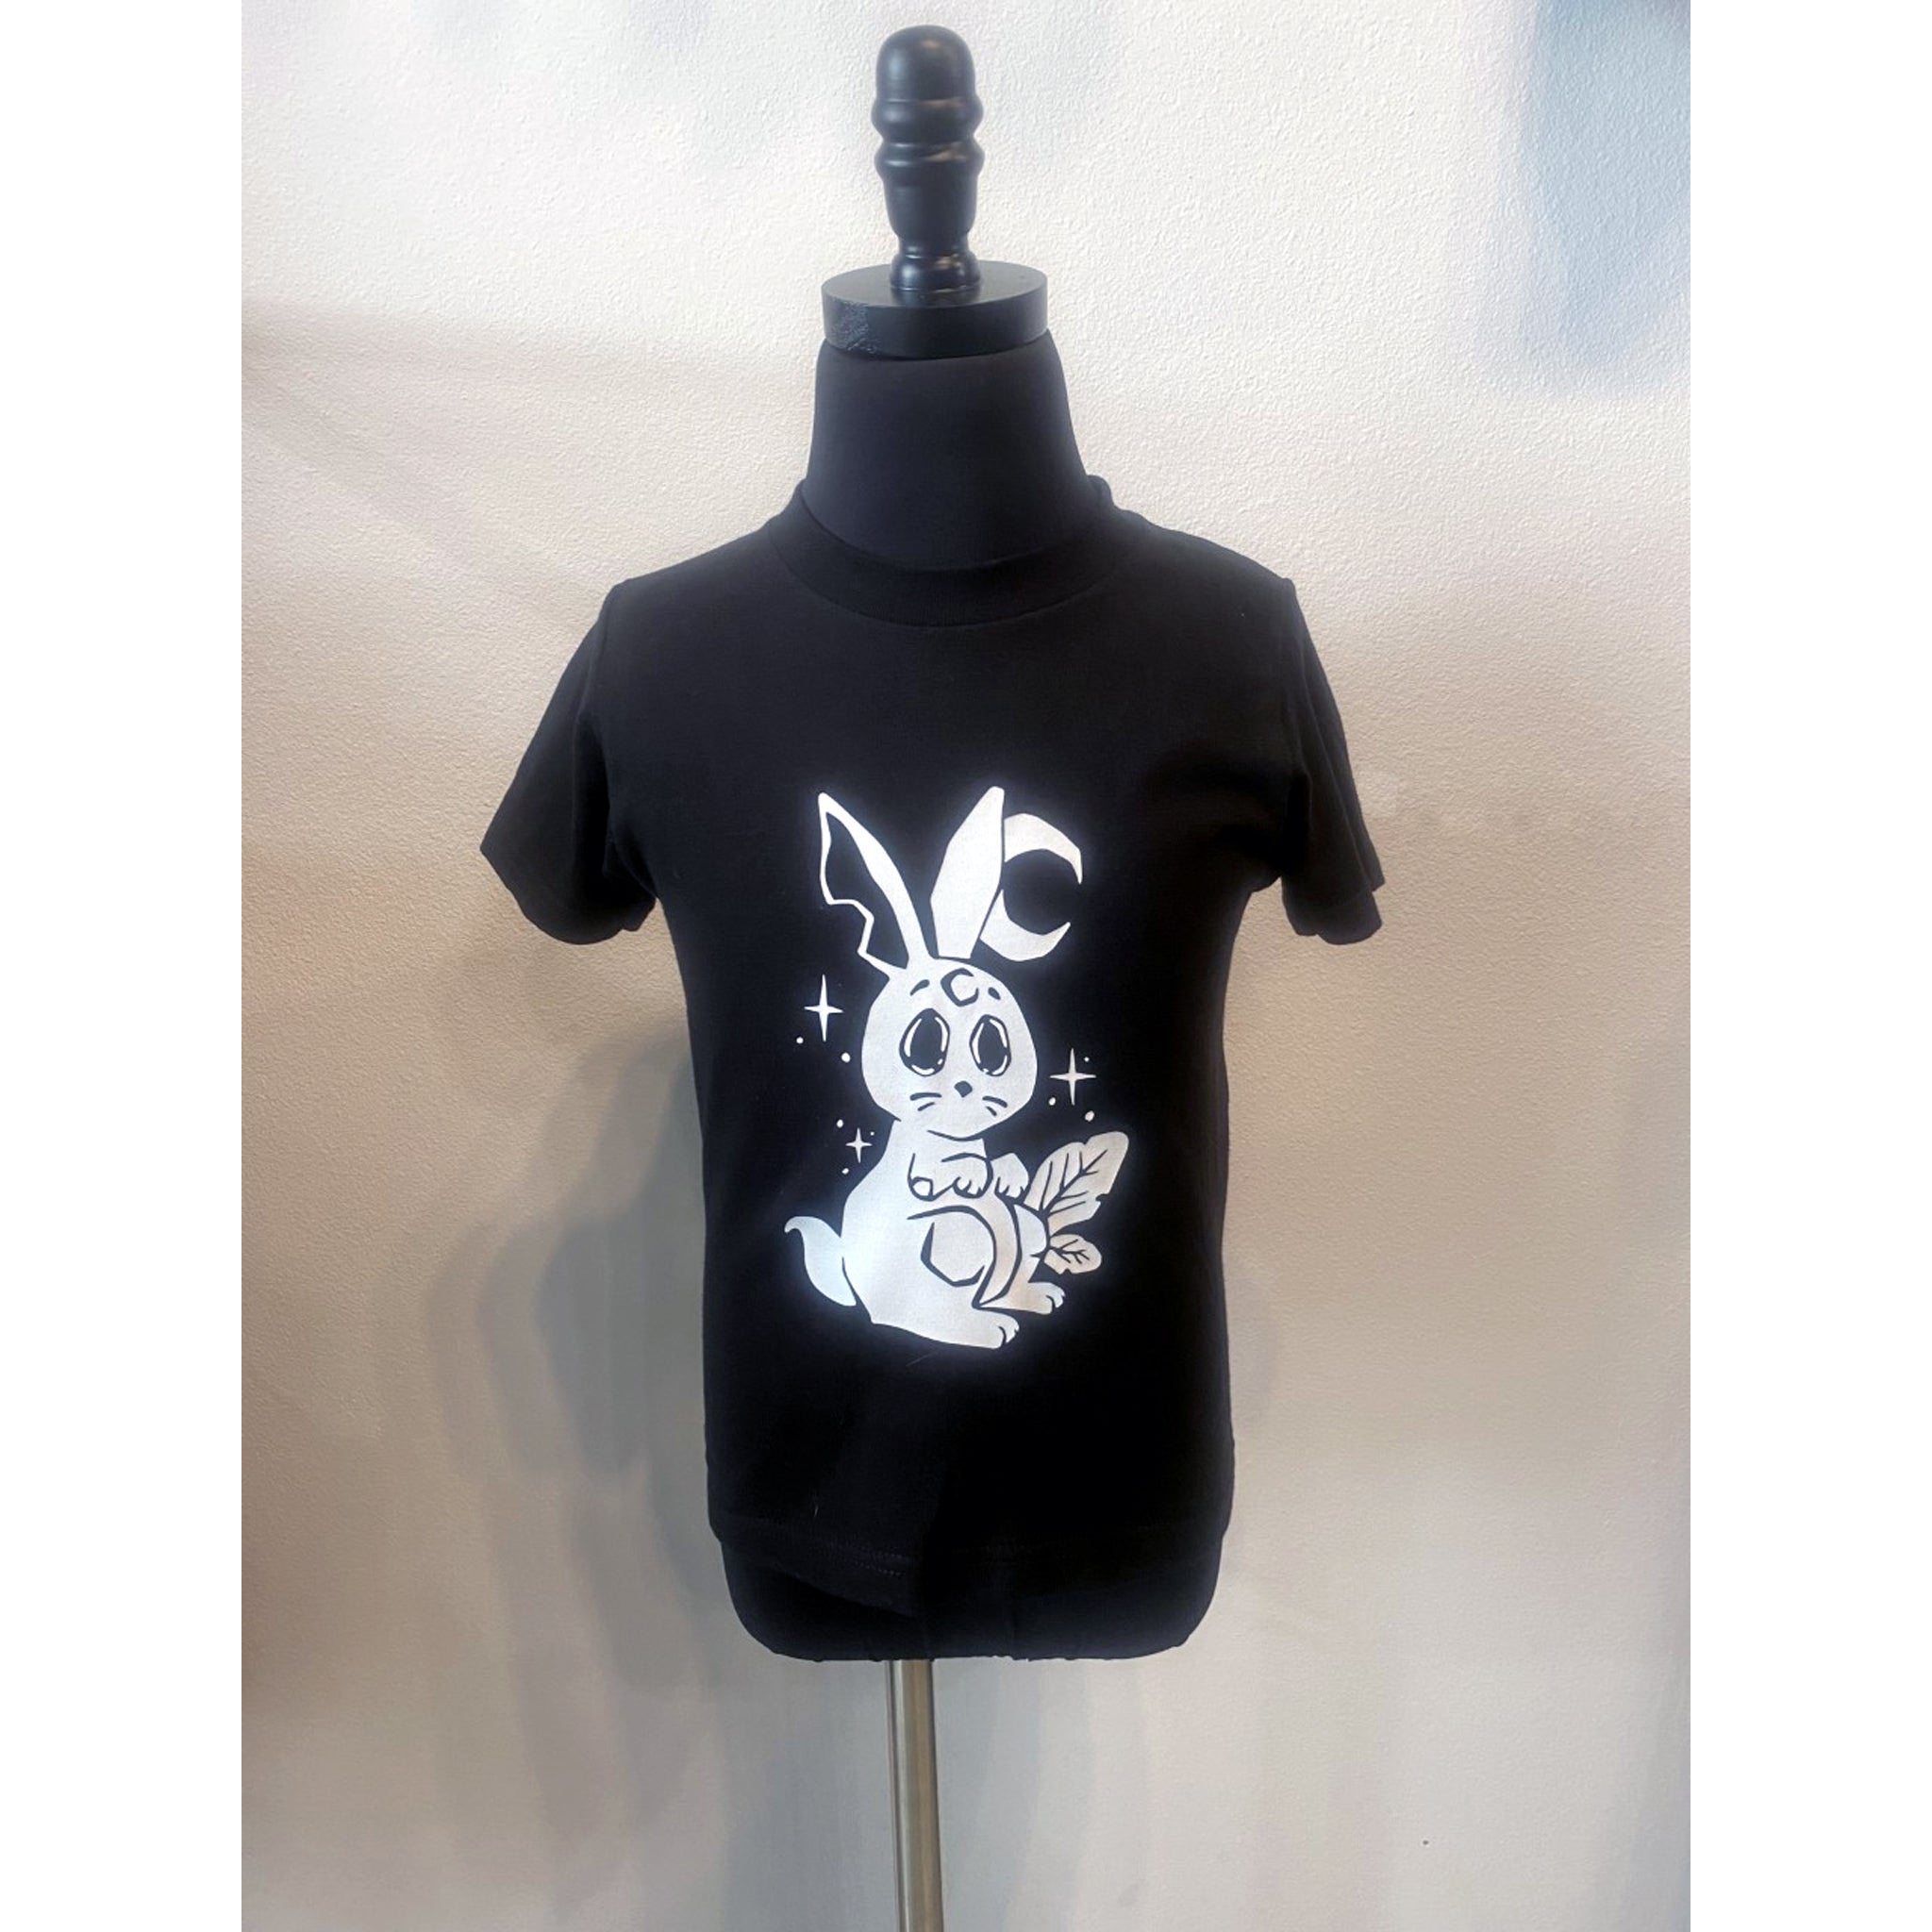 New Year of the Rabbit bunny T-shirt